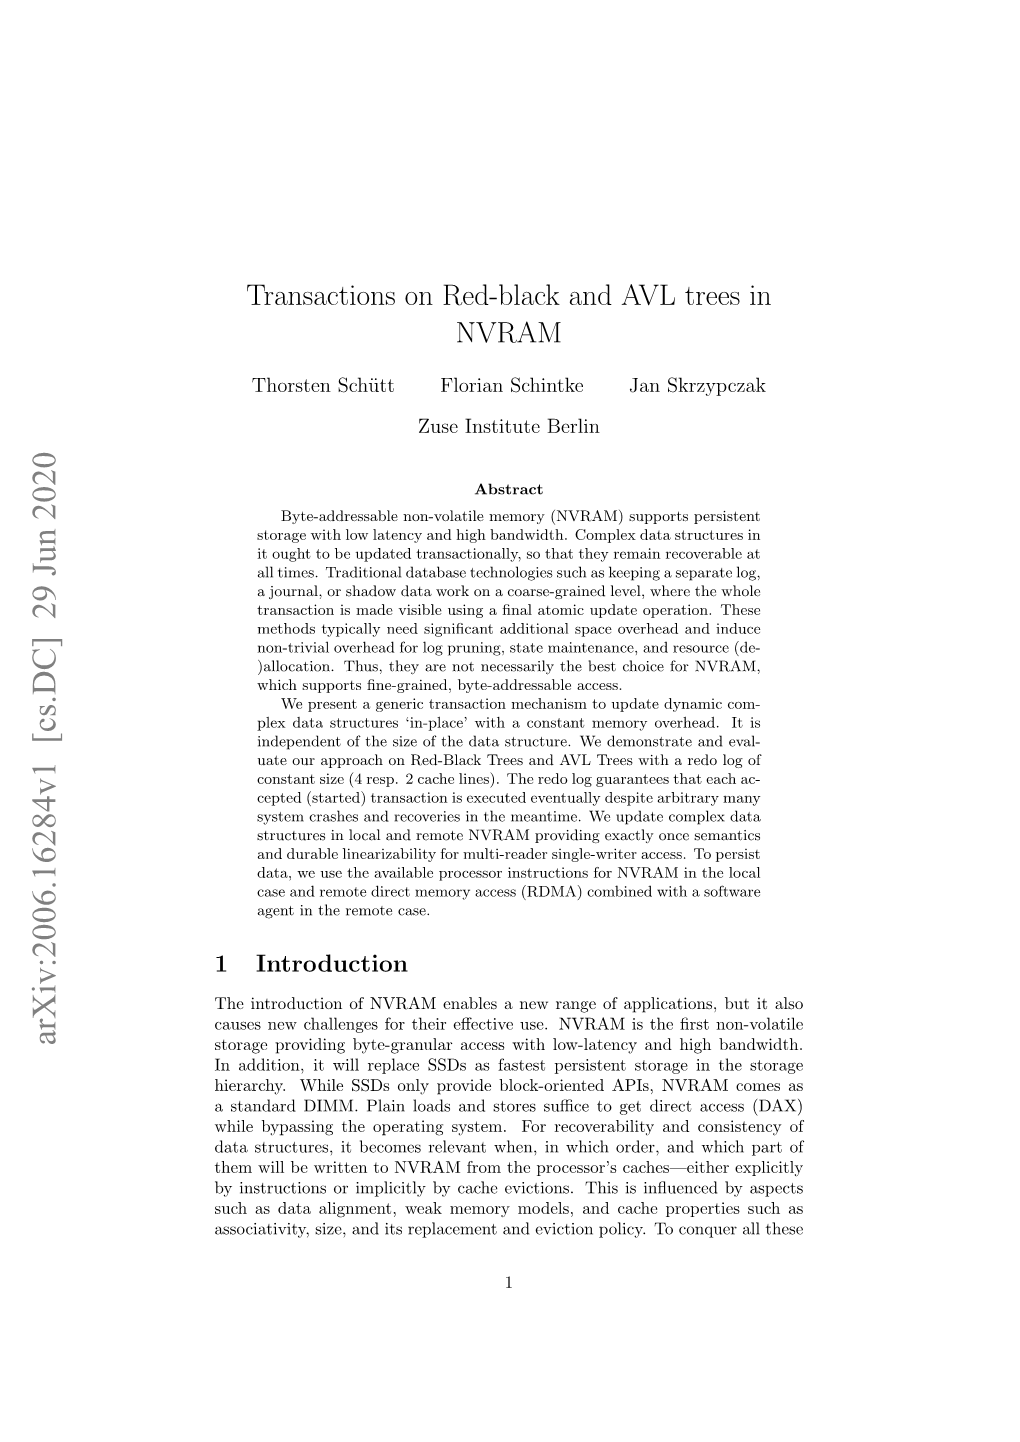 Transactions on Red-Black and AVL Trees in NVRAM